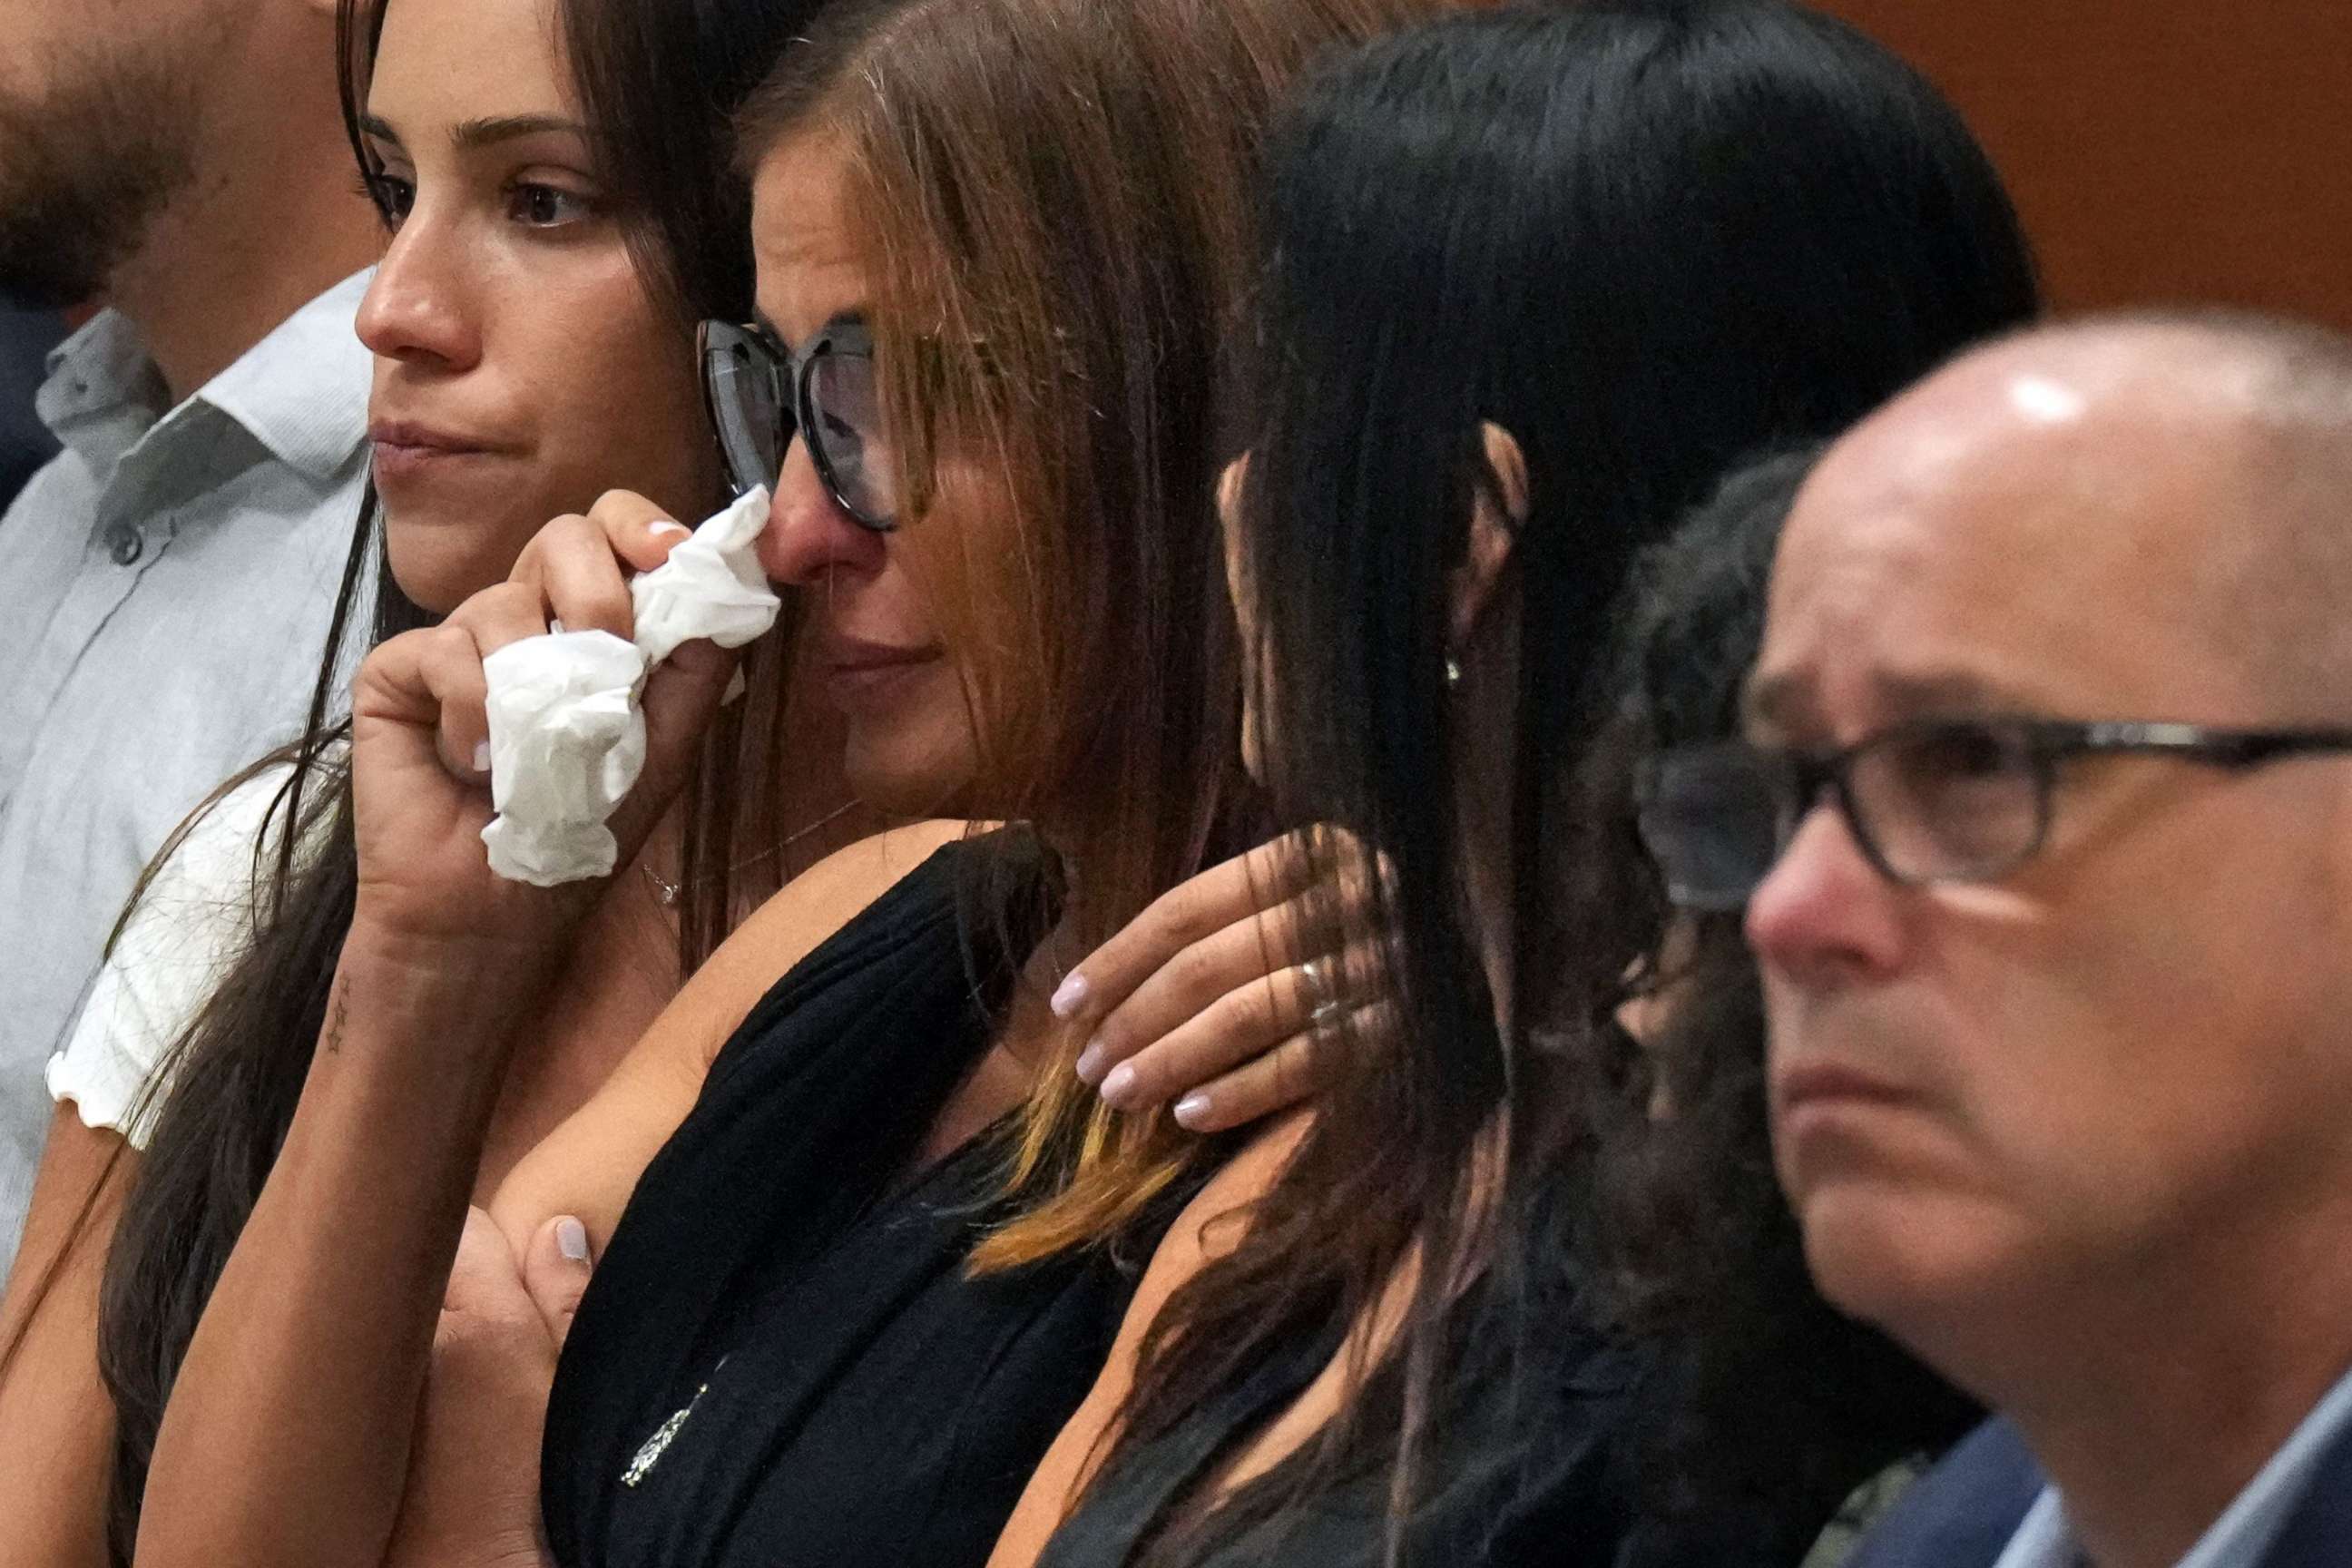 Patricia Padauy Oliver is comforted as a witness testifies to her son's fatal injuries during the penalty phase of the trial of Marjory Stoneman Douglas High School shooter Nikolas Cruz, in Fort Lauderdale, Fla., Aug. 1, 2022.